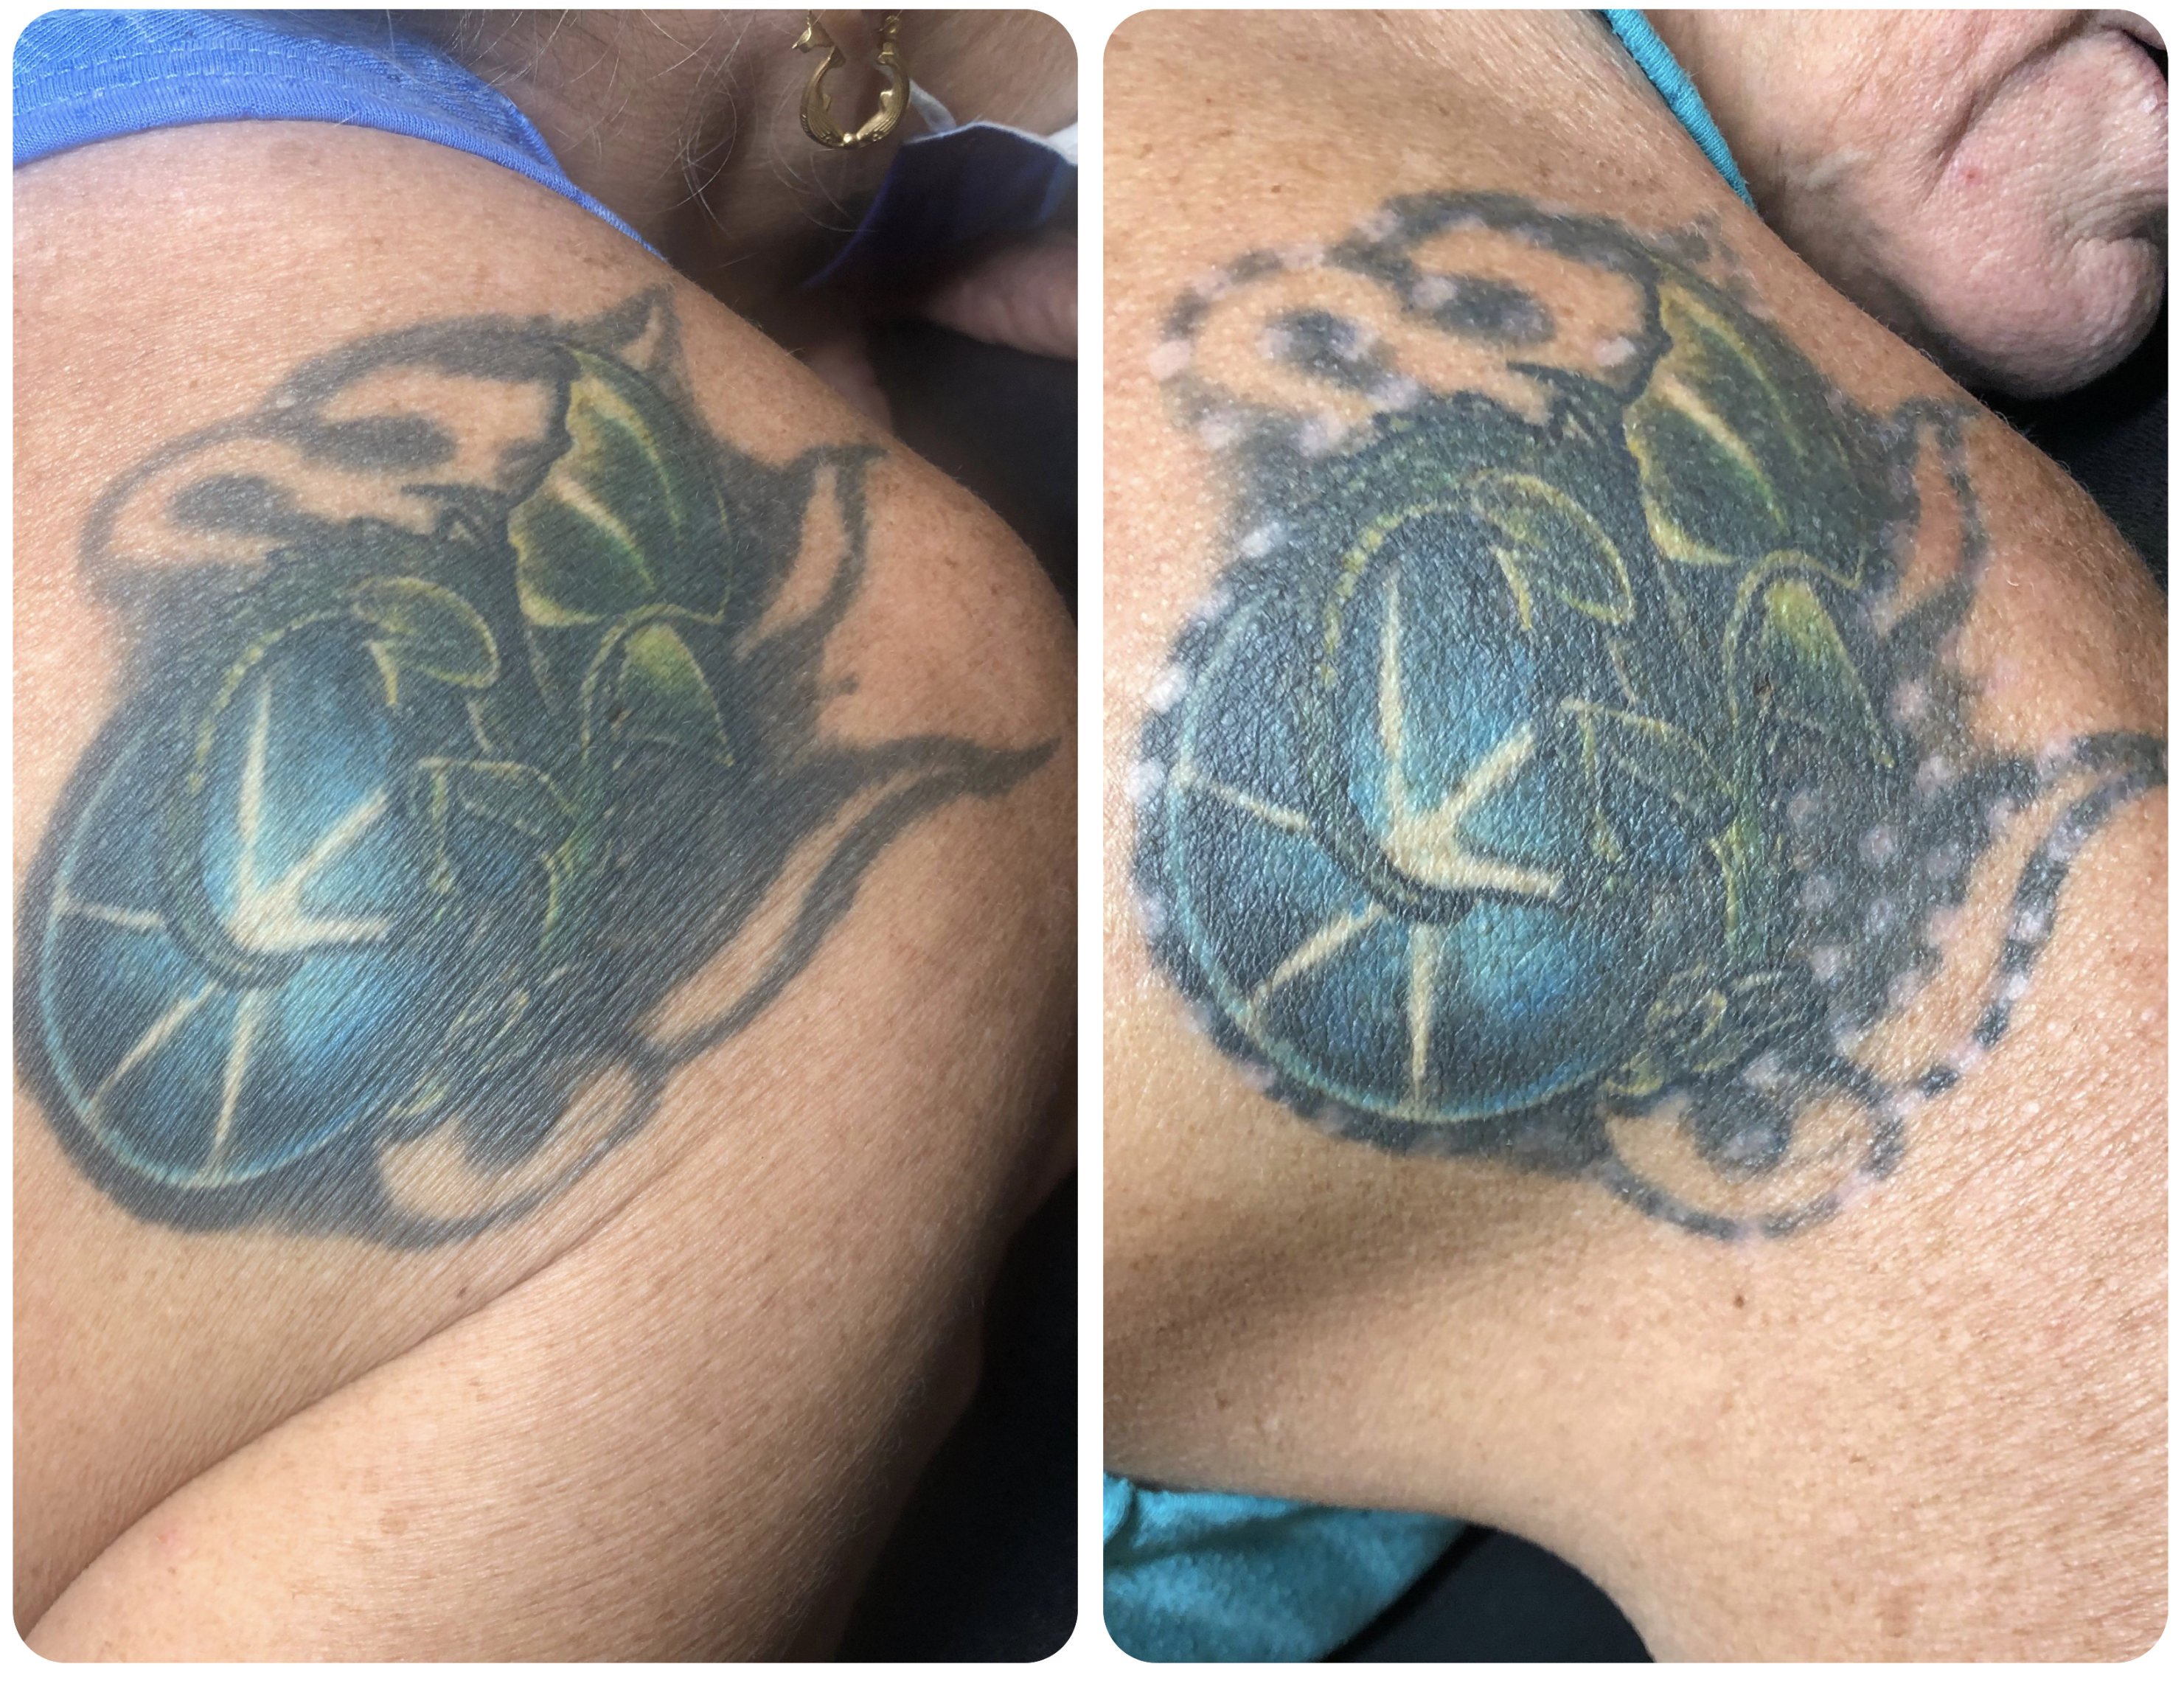 Shoulder Blade Colorful Tattoo Removal After First Session